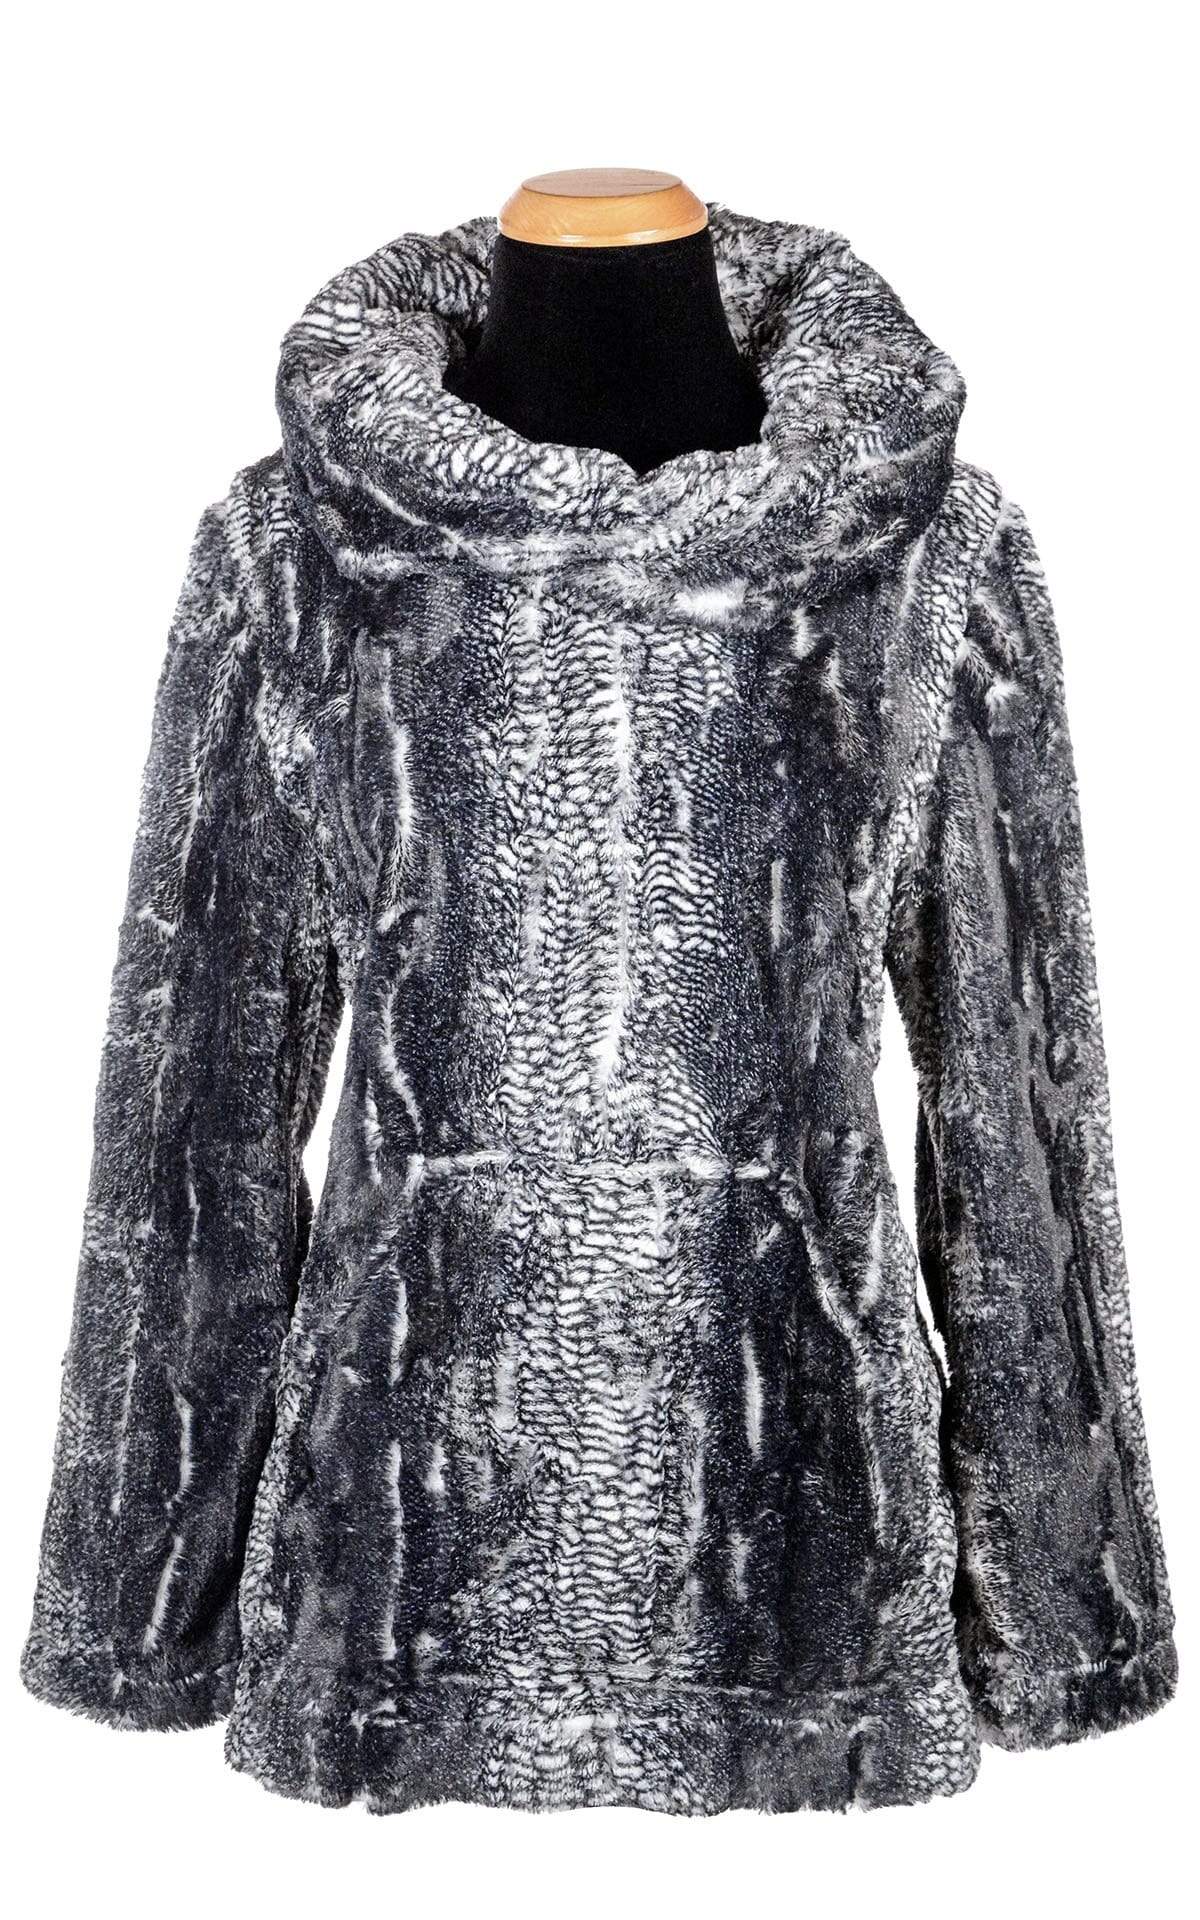 Pandemonium Millinery Hooded Lounger - Luxury Faux Fur in Black Mamba Outerwear